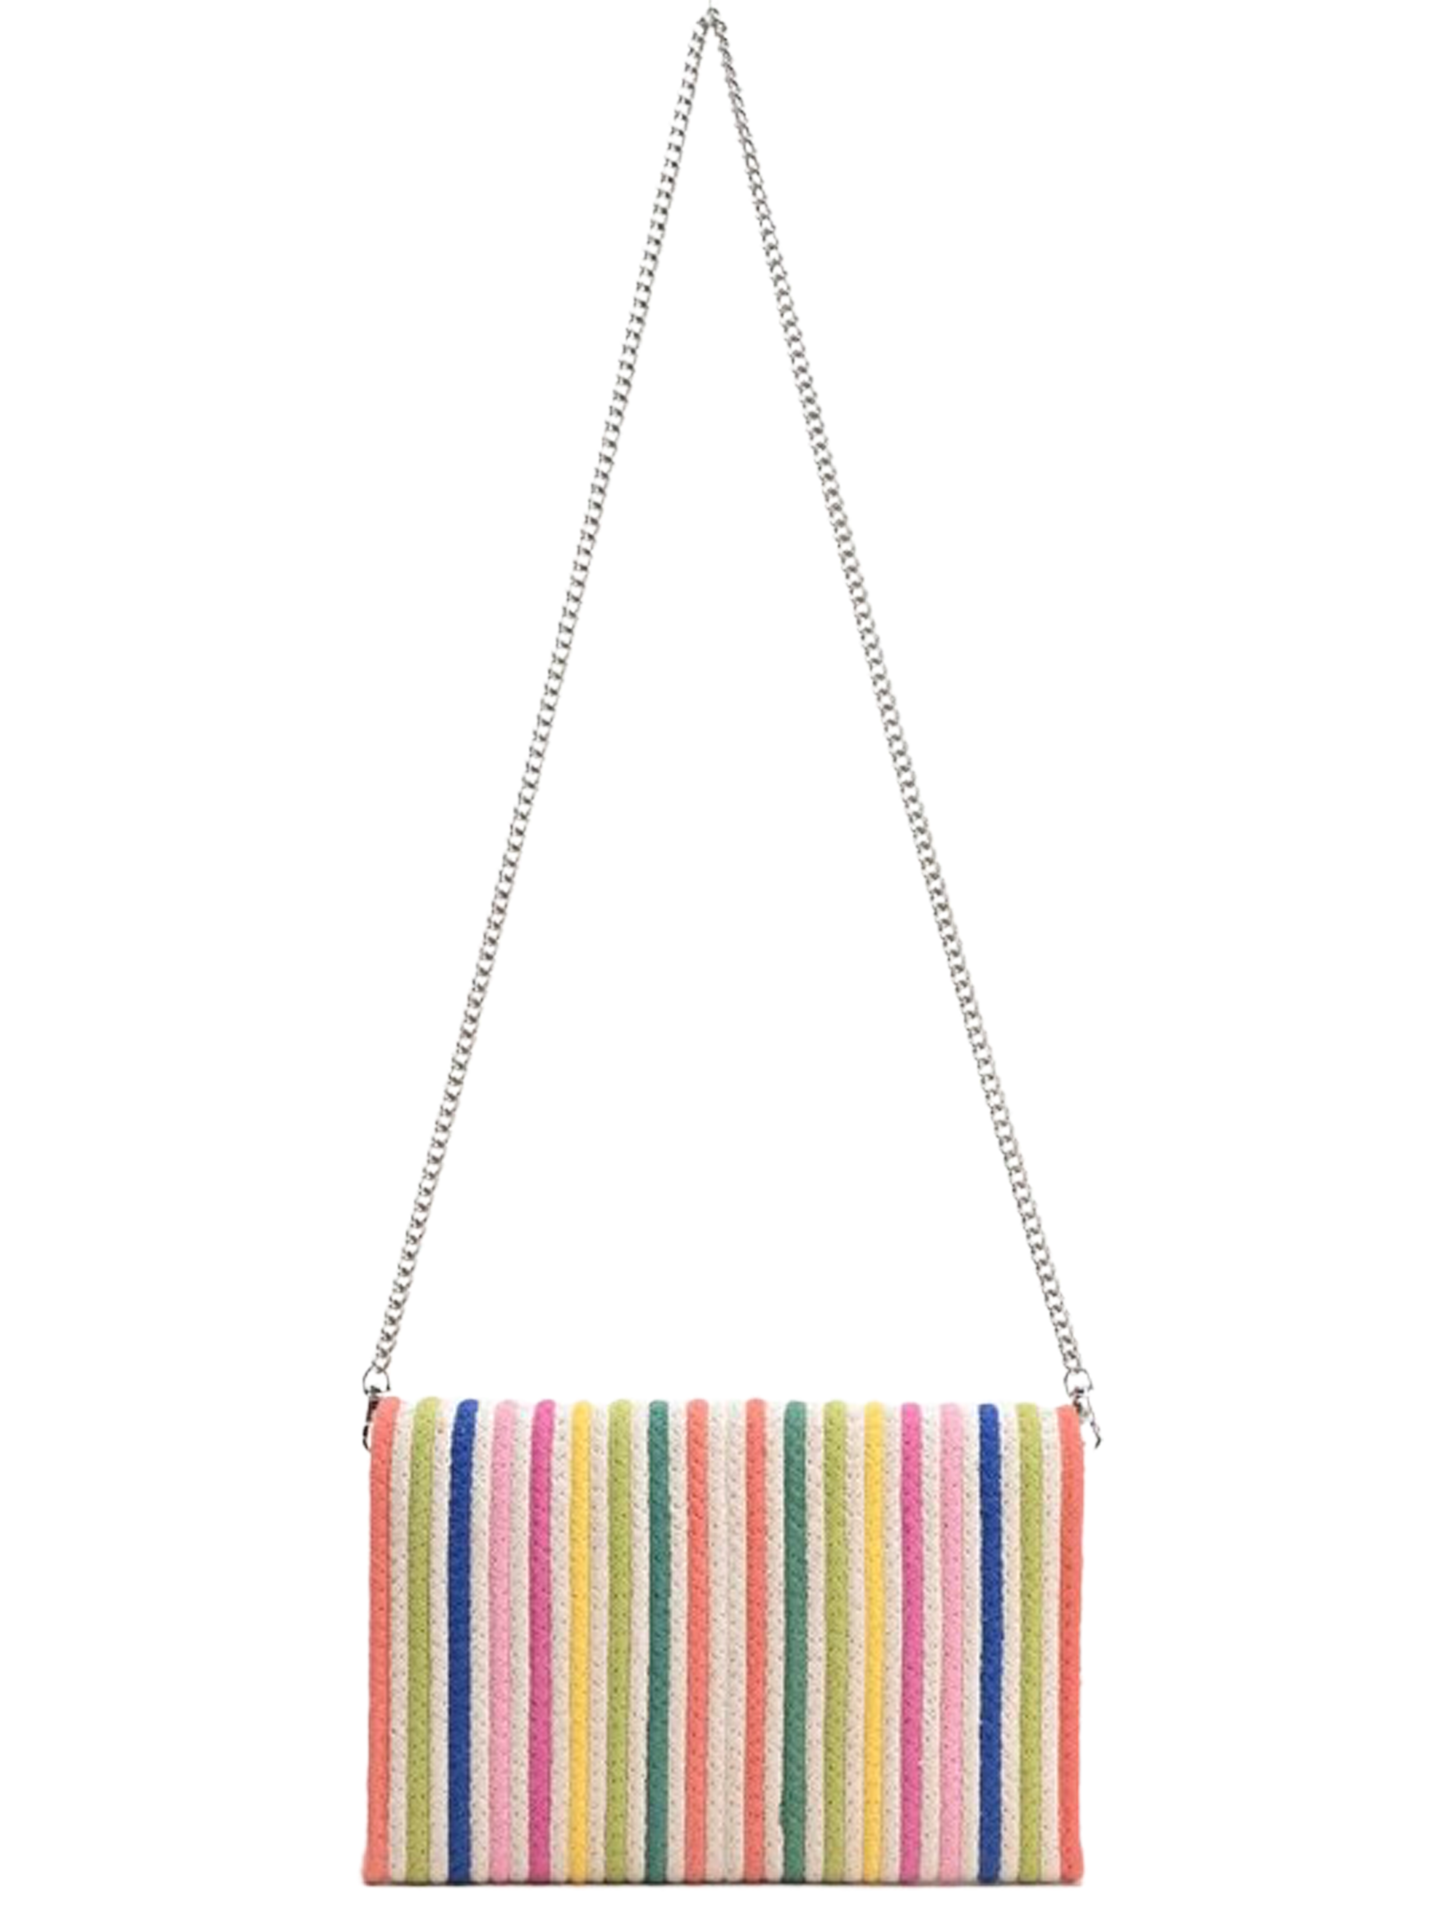 The Rainbow Embellished Purse back with chain